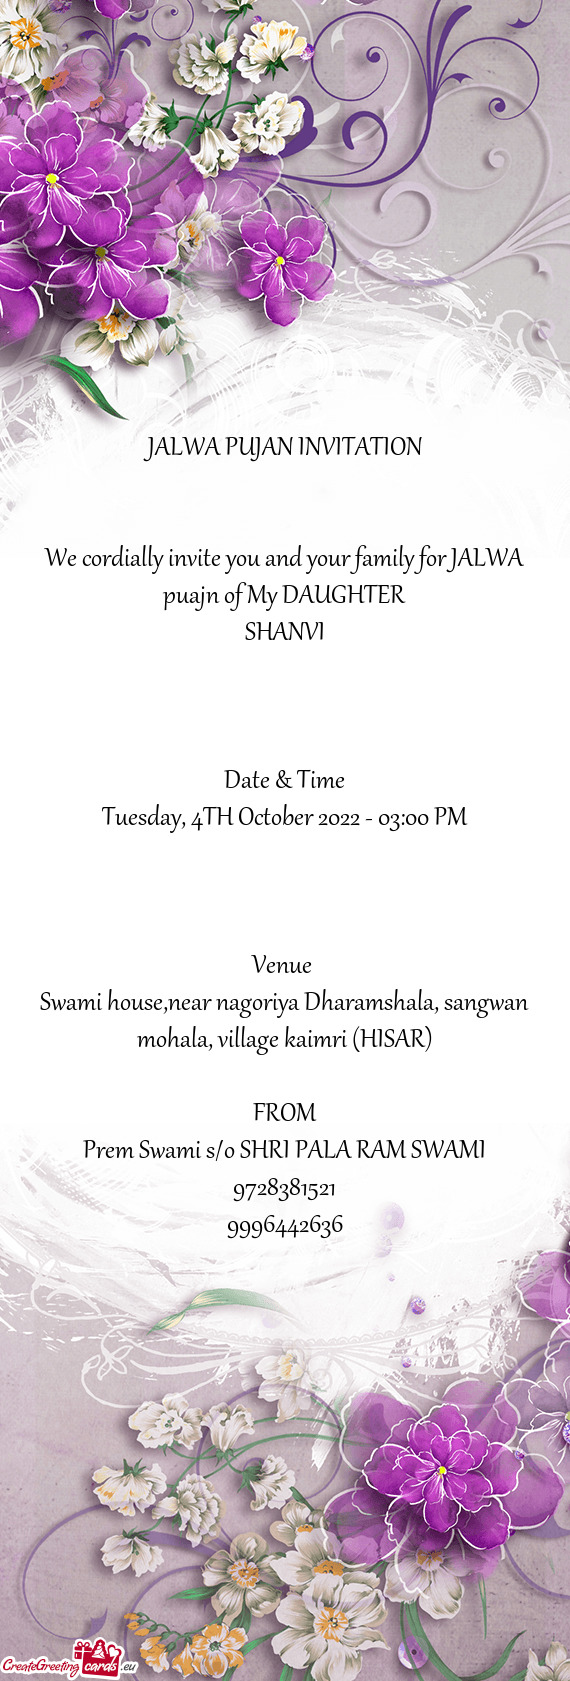 We cordially invite you and your family for JALWA puajn of My DAUGHTER